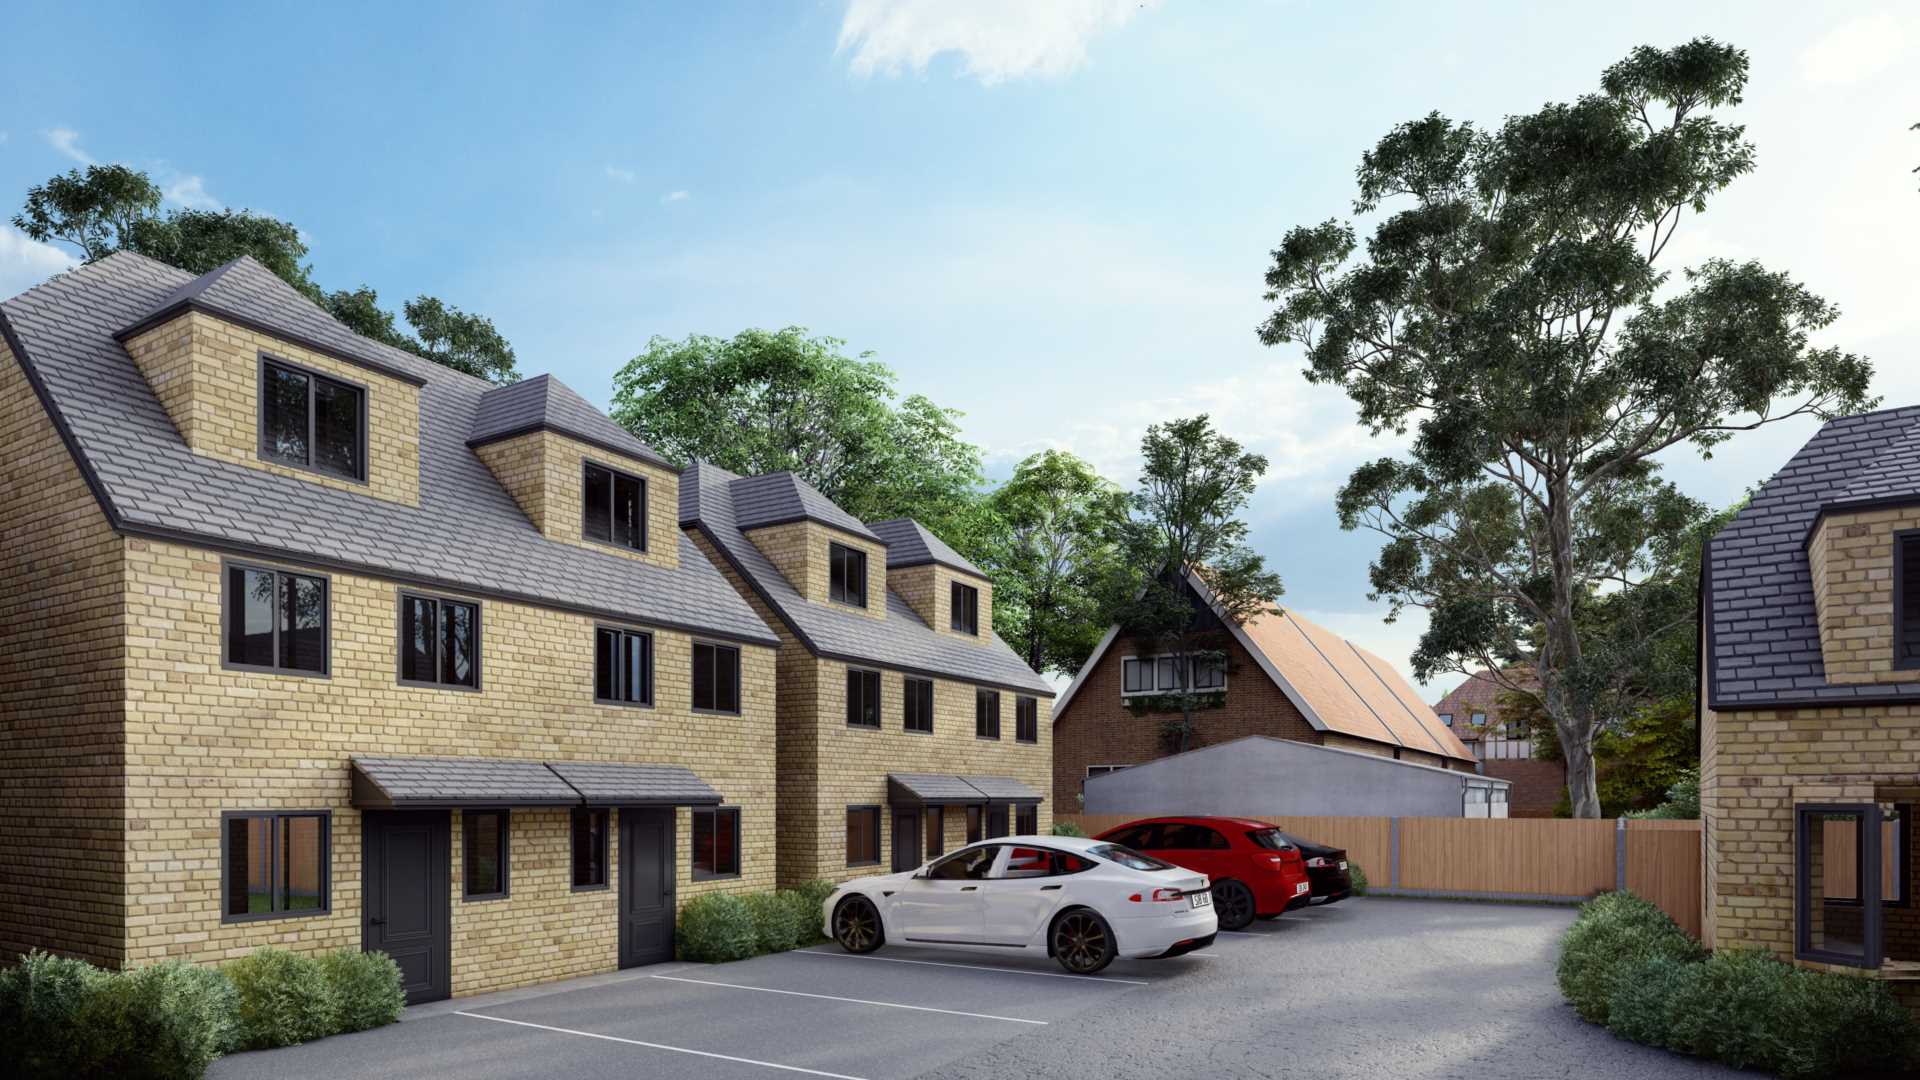 PLOT 1  **  BRAND NEW AND COMING SOON - OFF PLAN RESERVATIONS BEING TAKEN  **  HIGH STREET GREEN, HH, Image 3